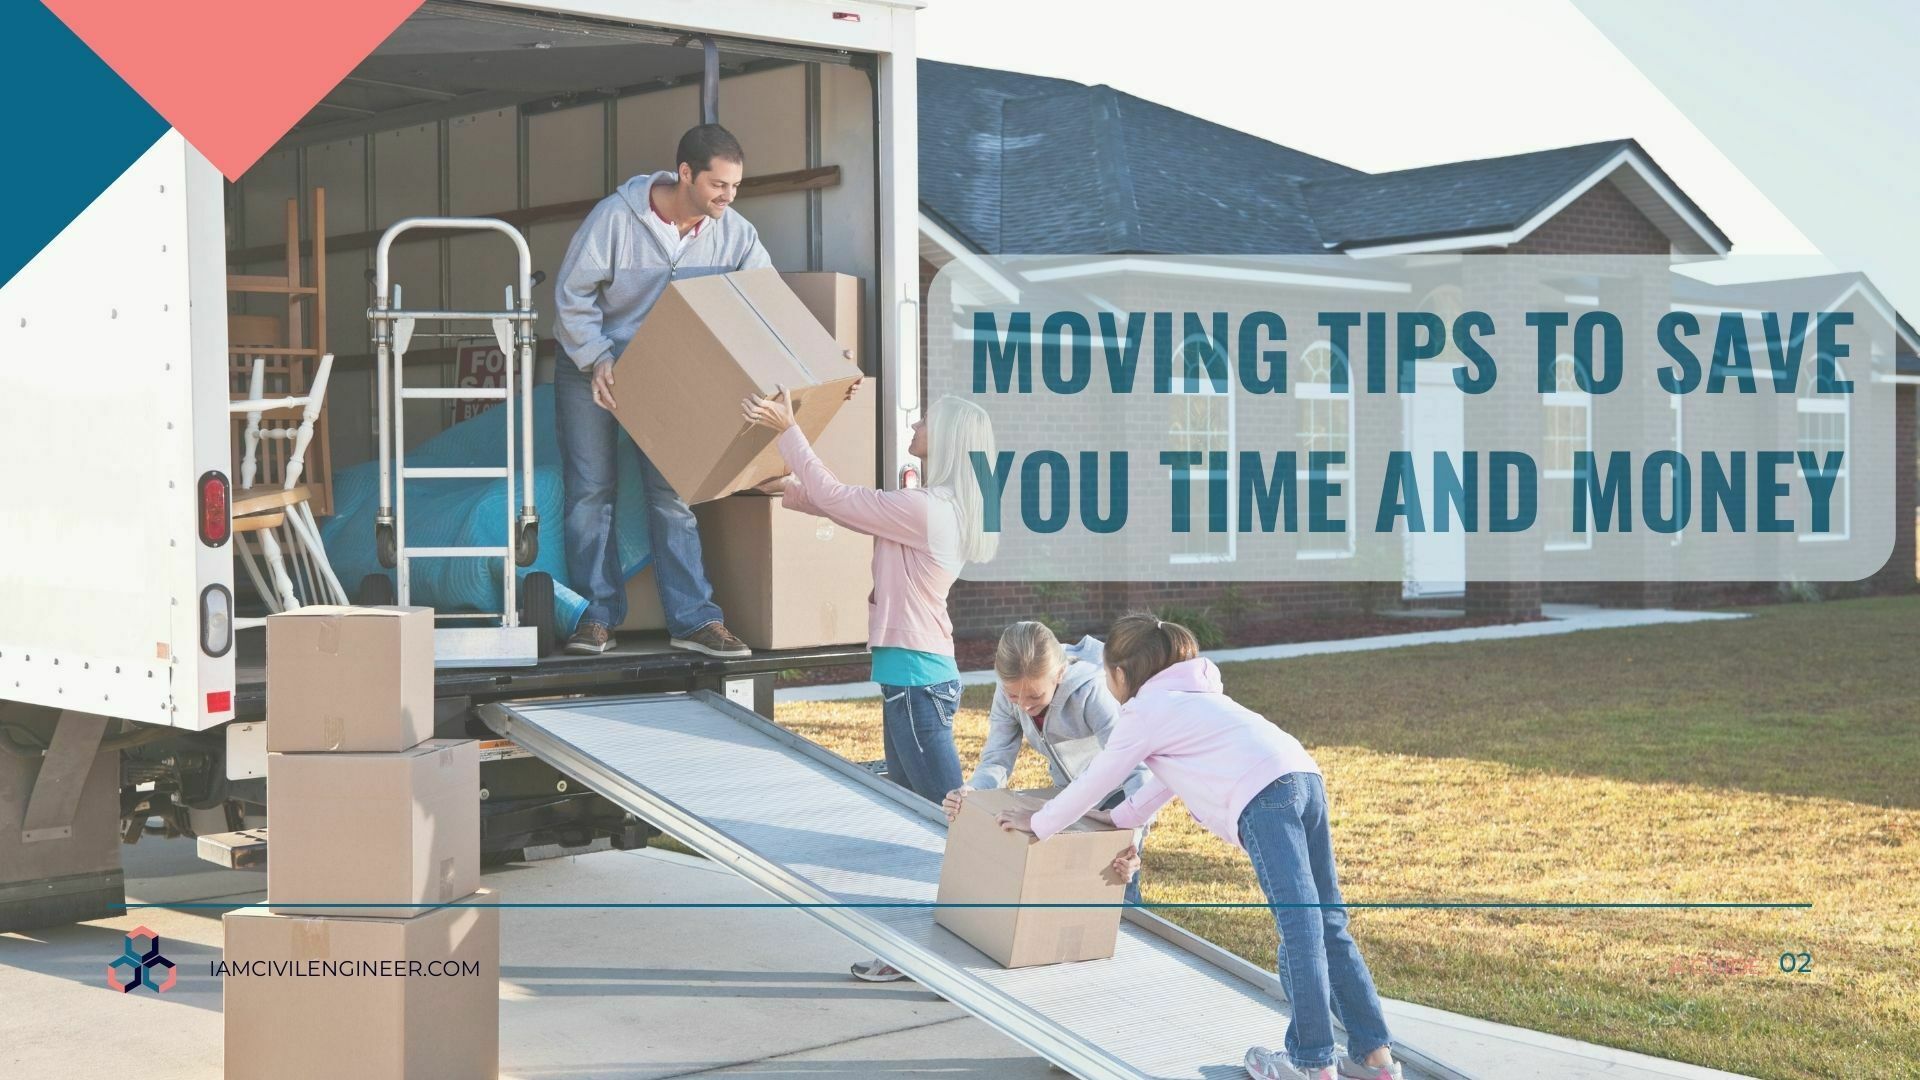 Moving tips